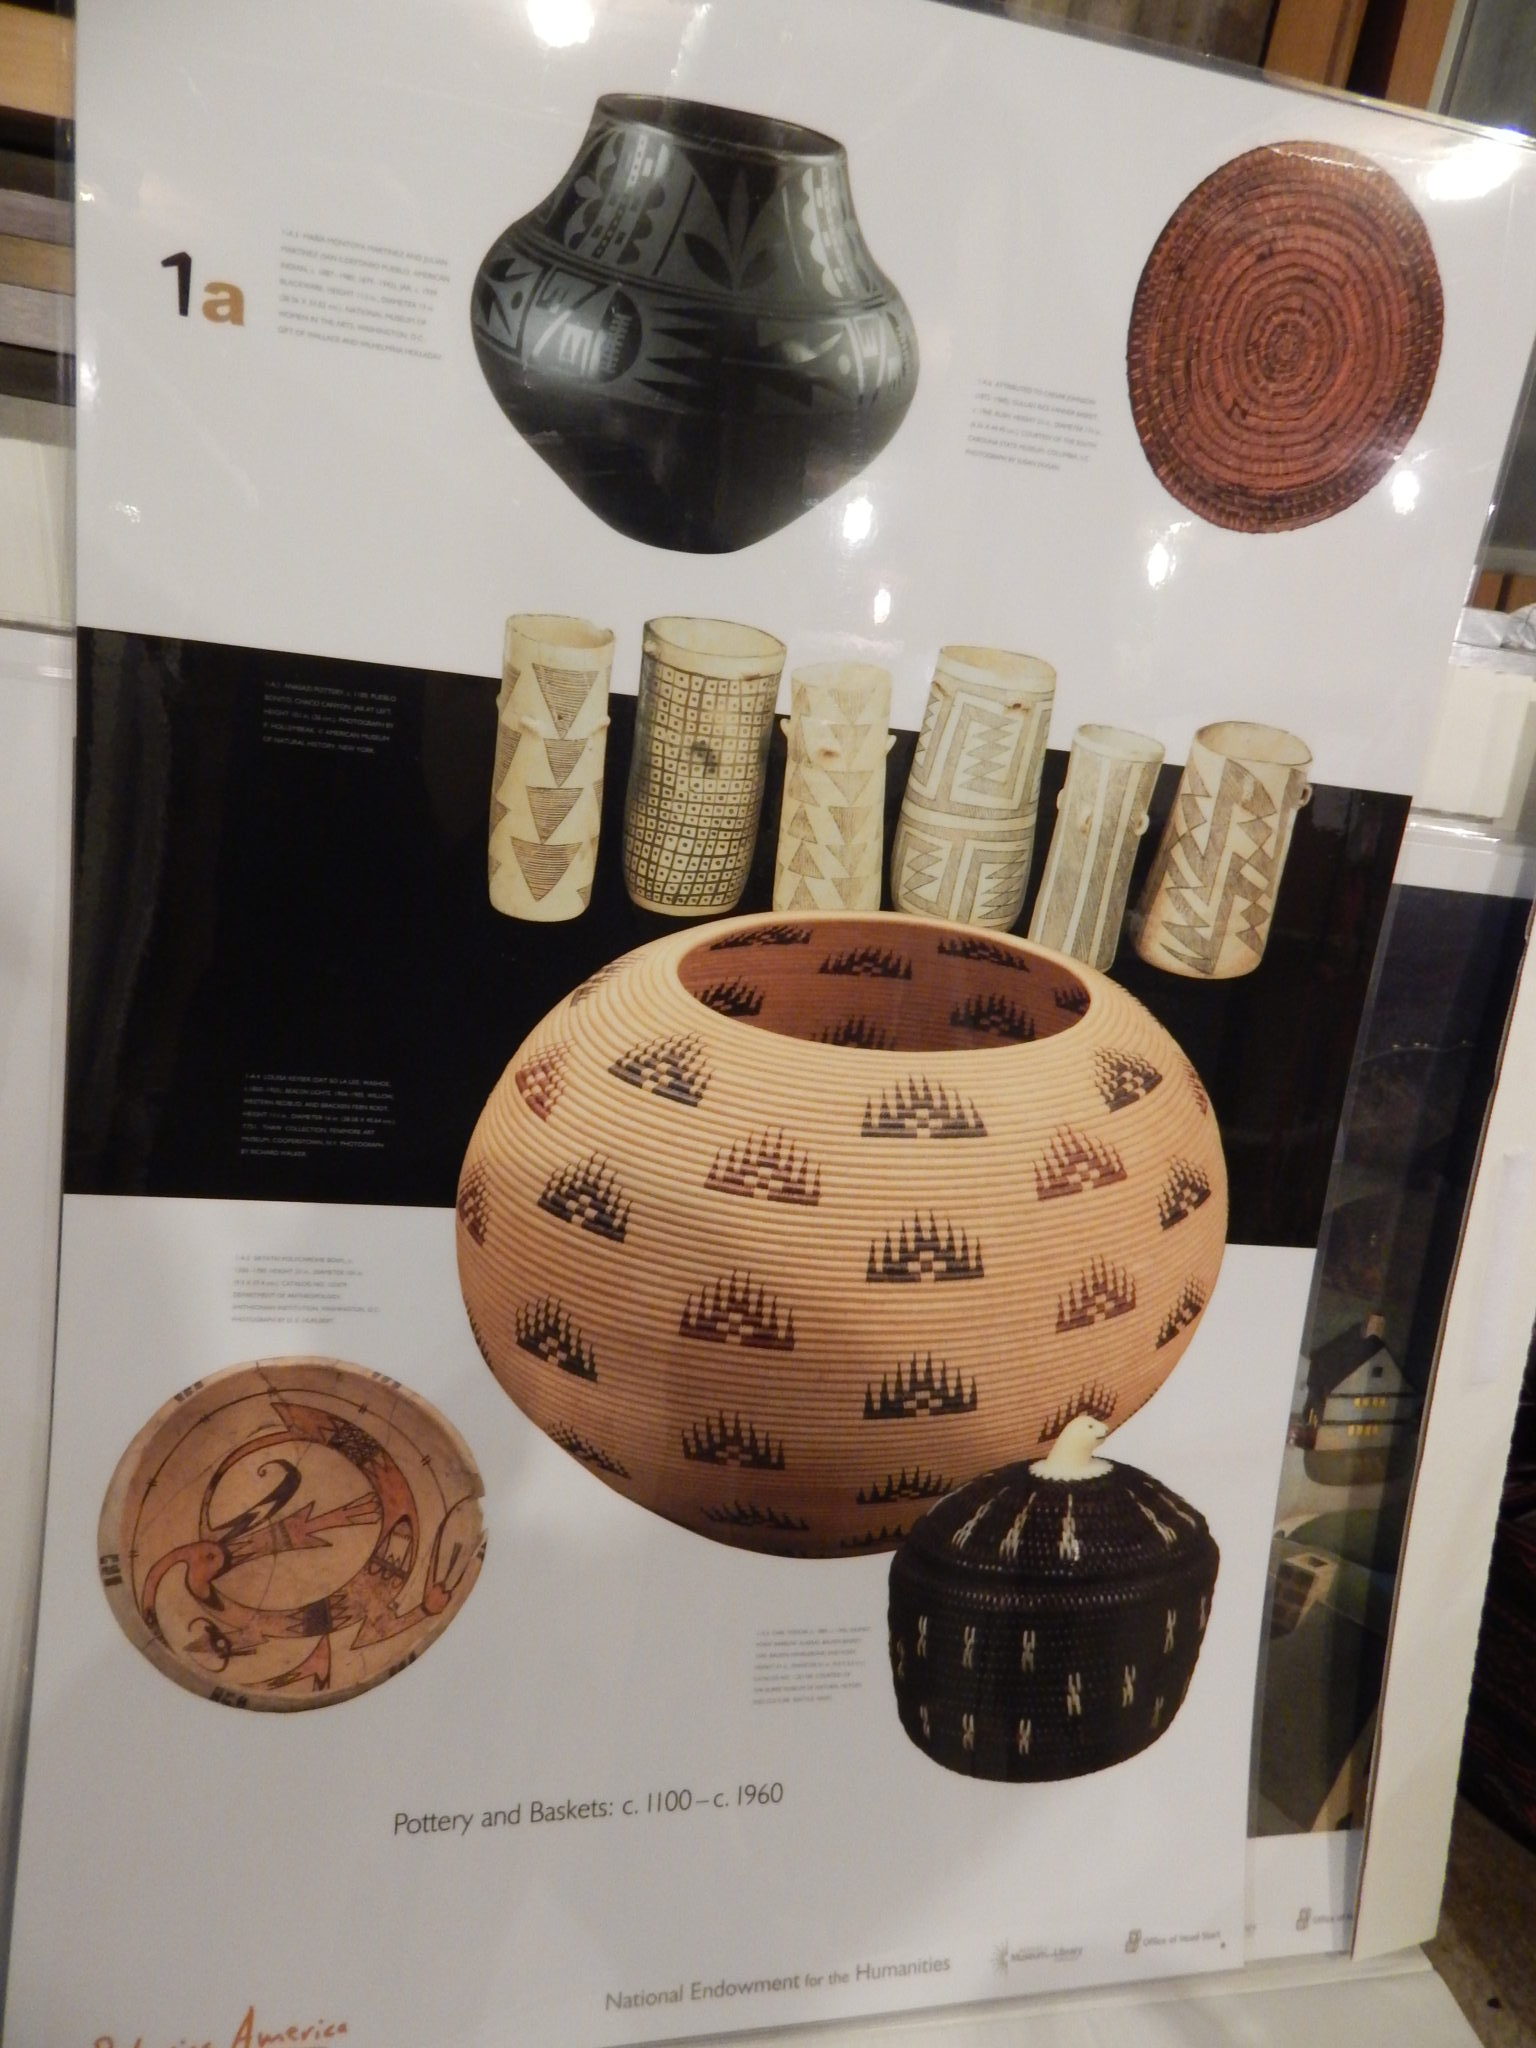 photo of Native American basketry and pottery, c.1100-1960